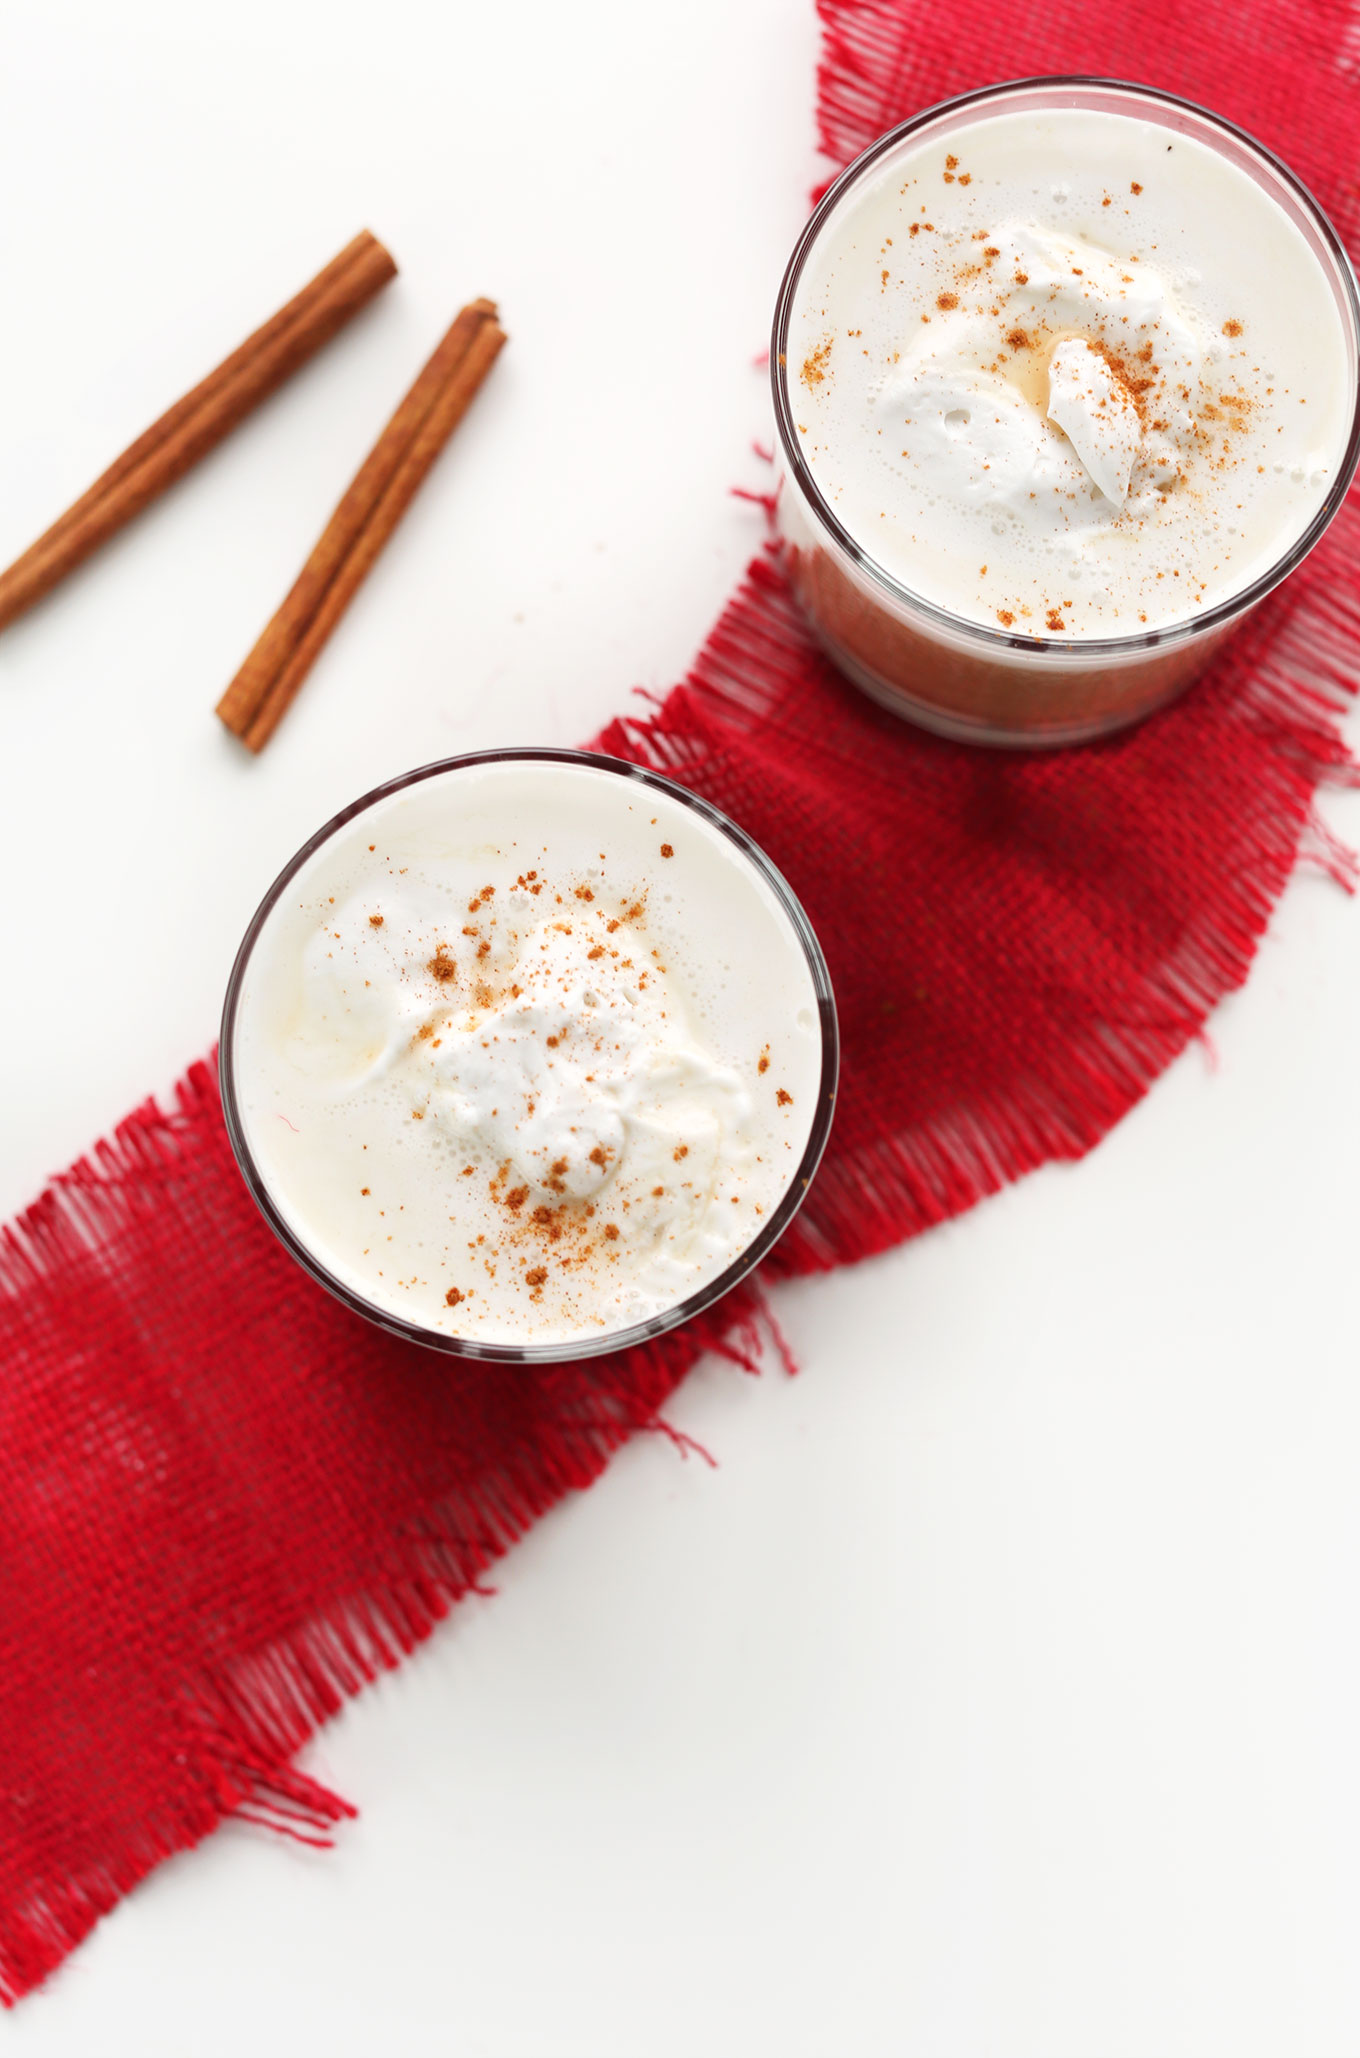 Simple Vegan Chai Latte | Basic ingredients, fast and SO spicy and delicious! #vegan #chai #glutenfree #minimalistbaker